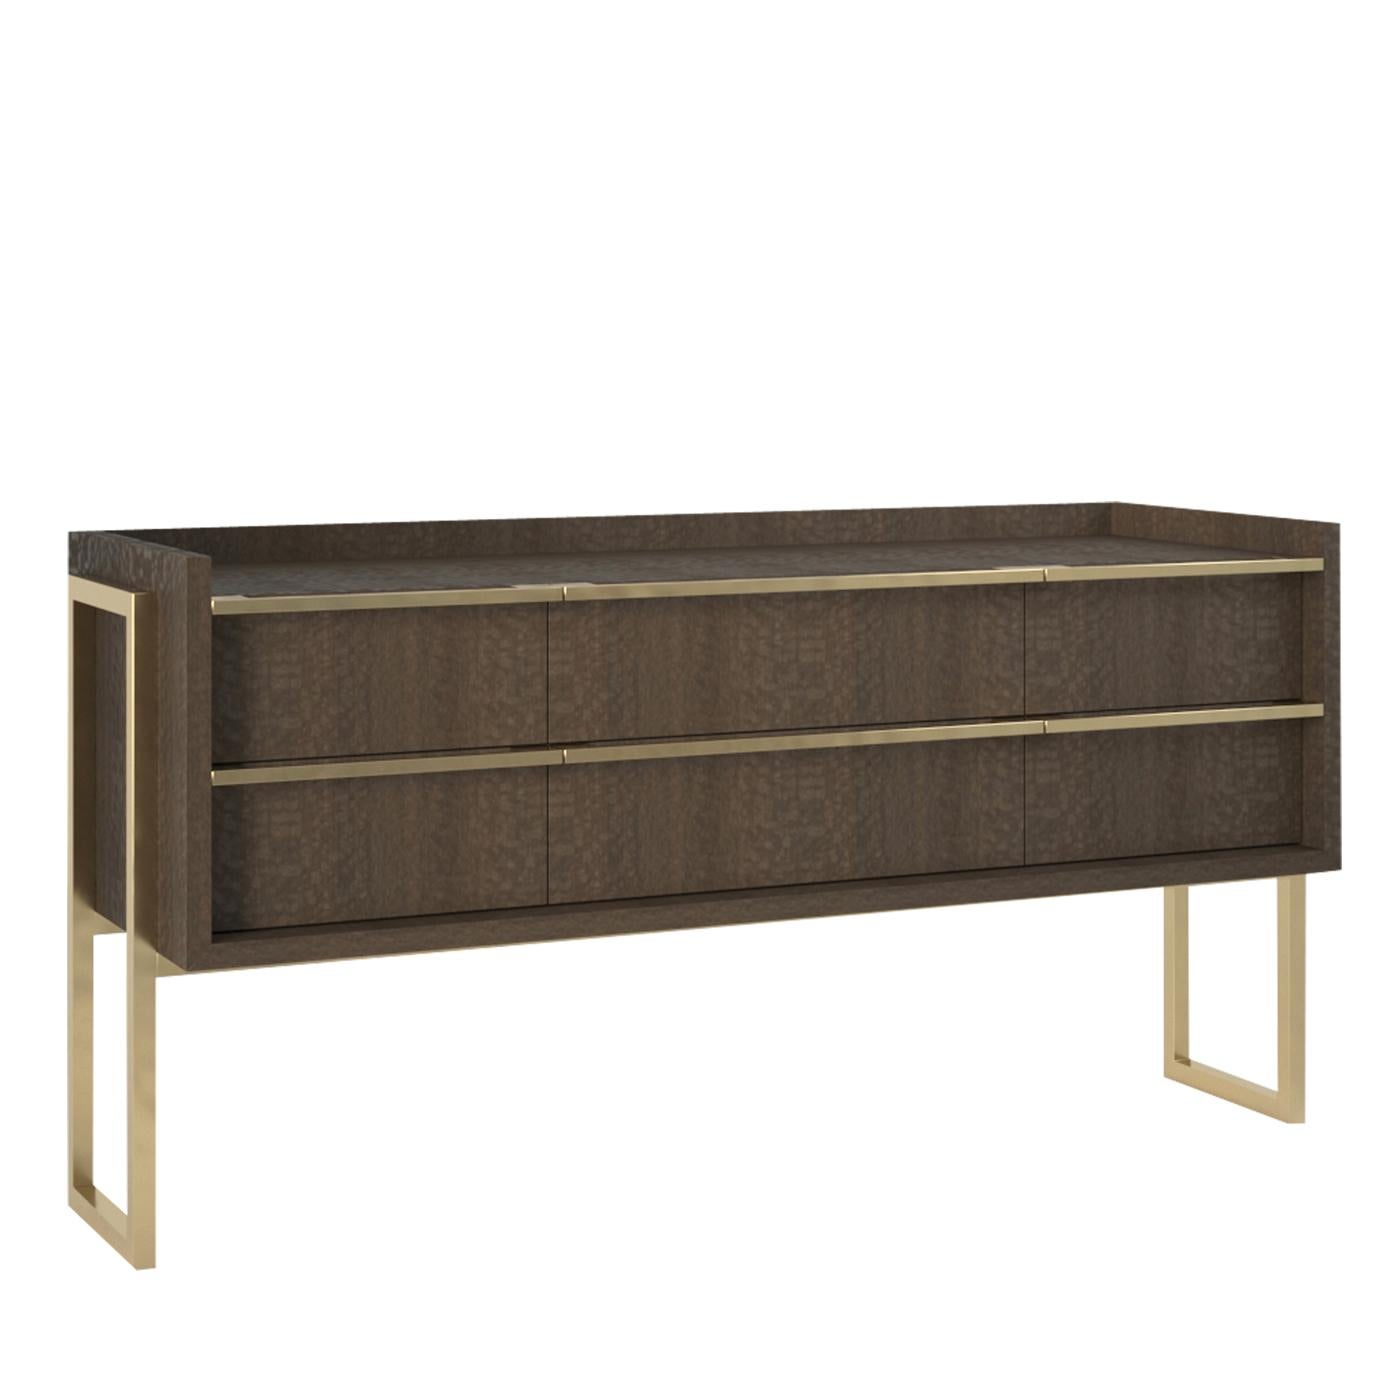 Sharp and straight lines define the design of this polished wooden dresser. The dark brown finish of its frame is absolutely predominant, contrasted only by brass-finished metal components such as the frame-shaped metal legs and the drawers' linear